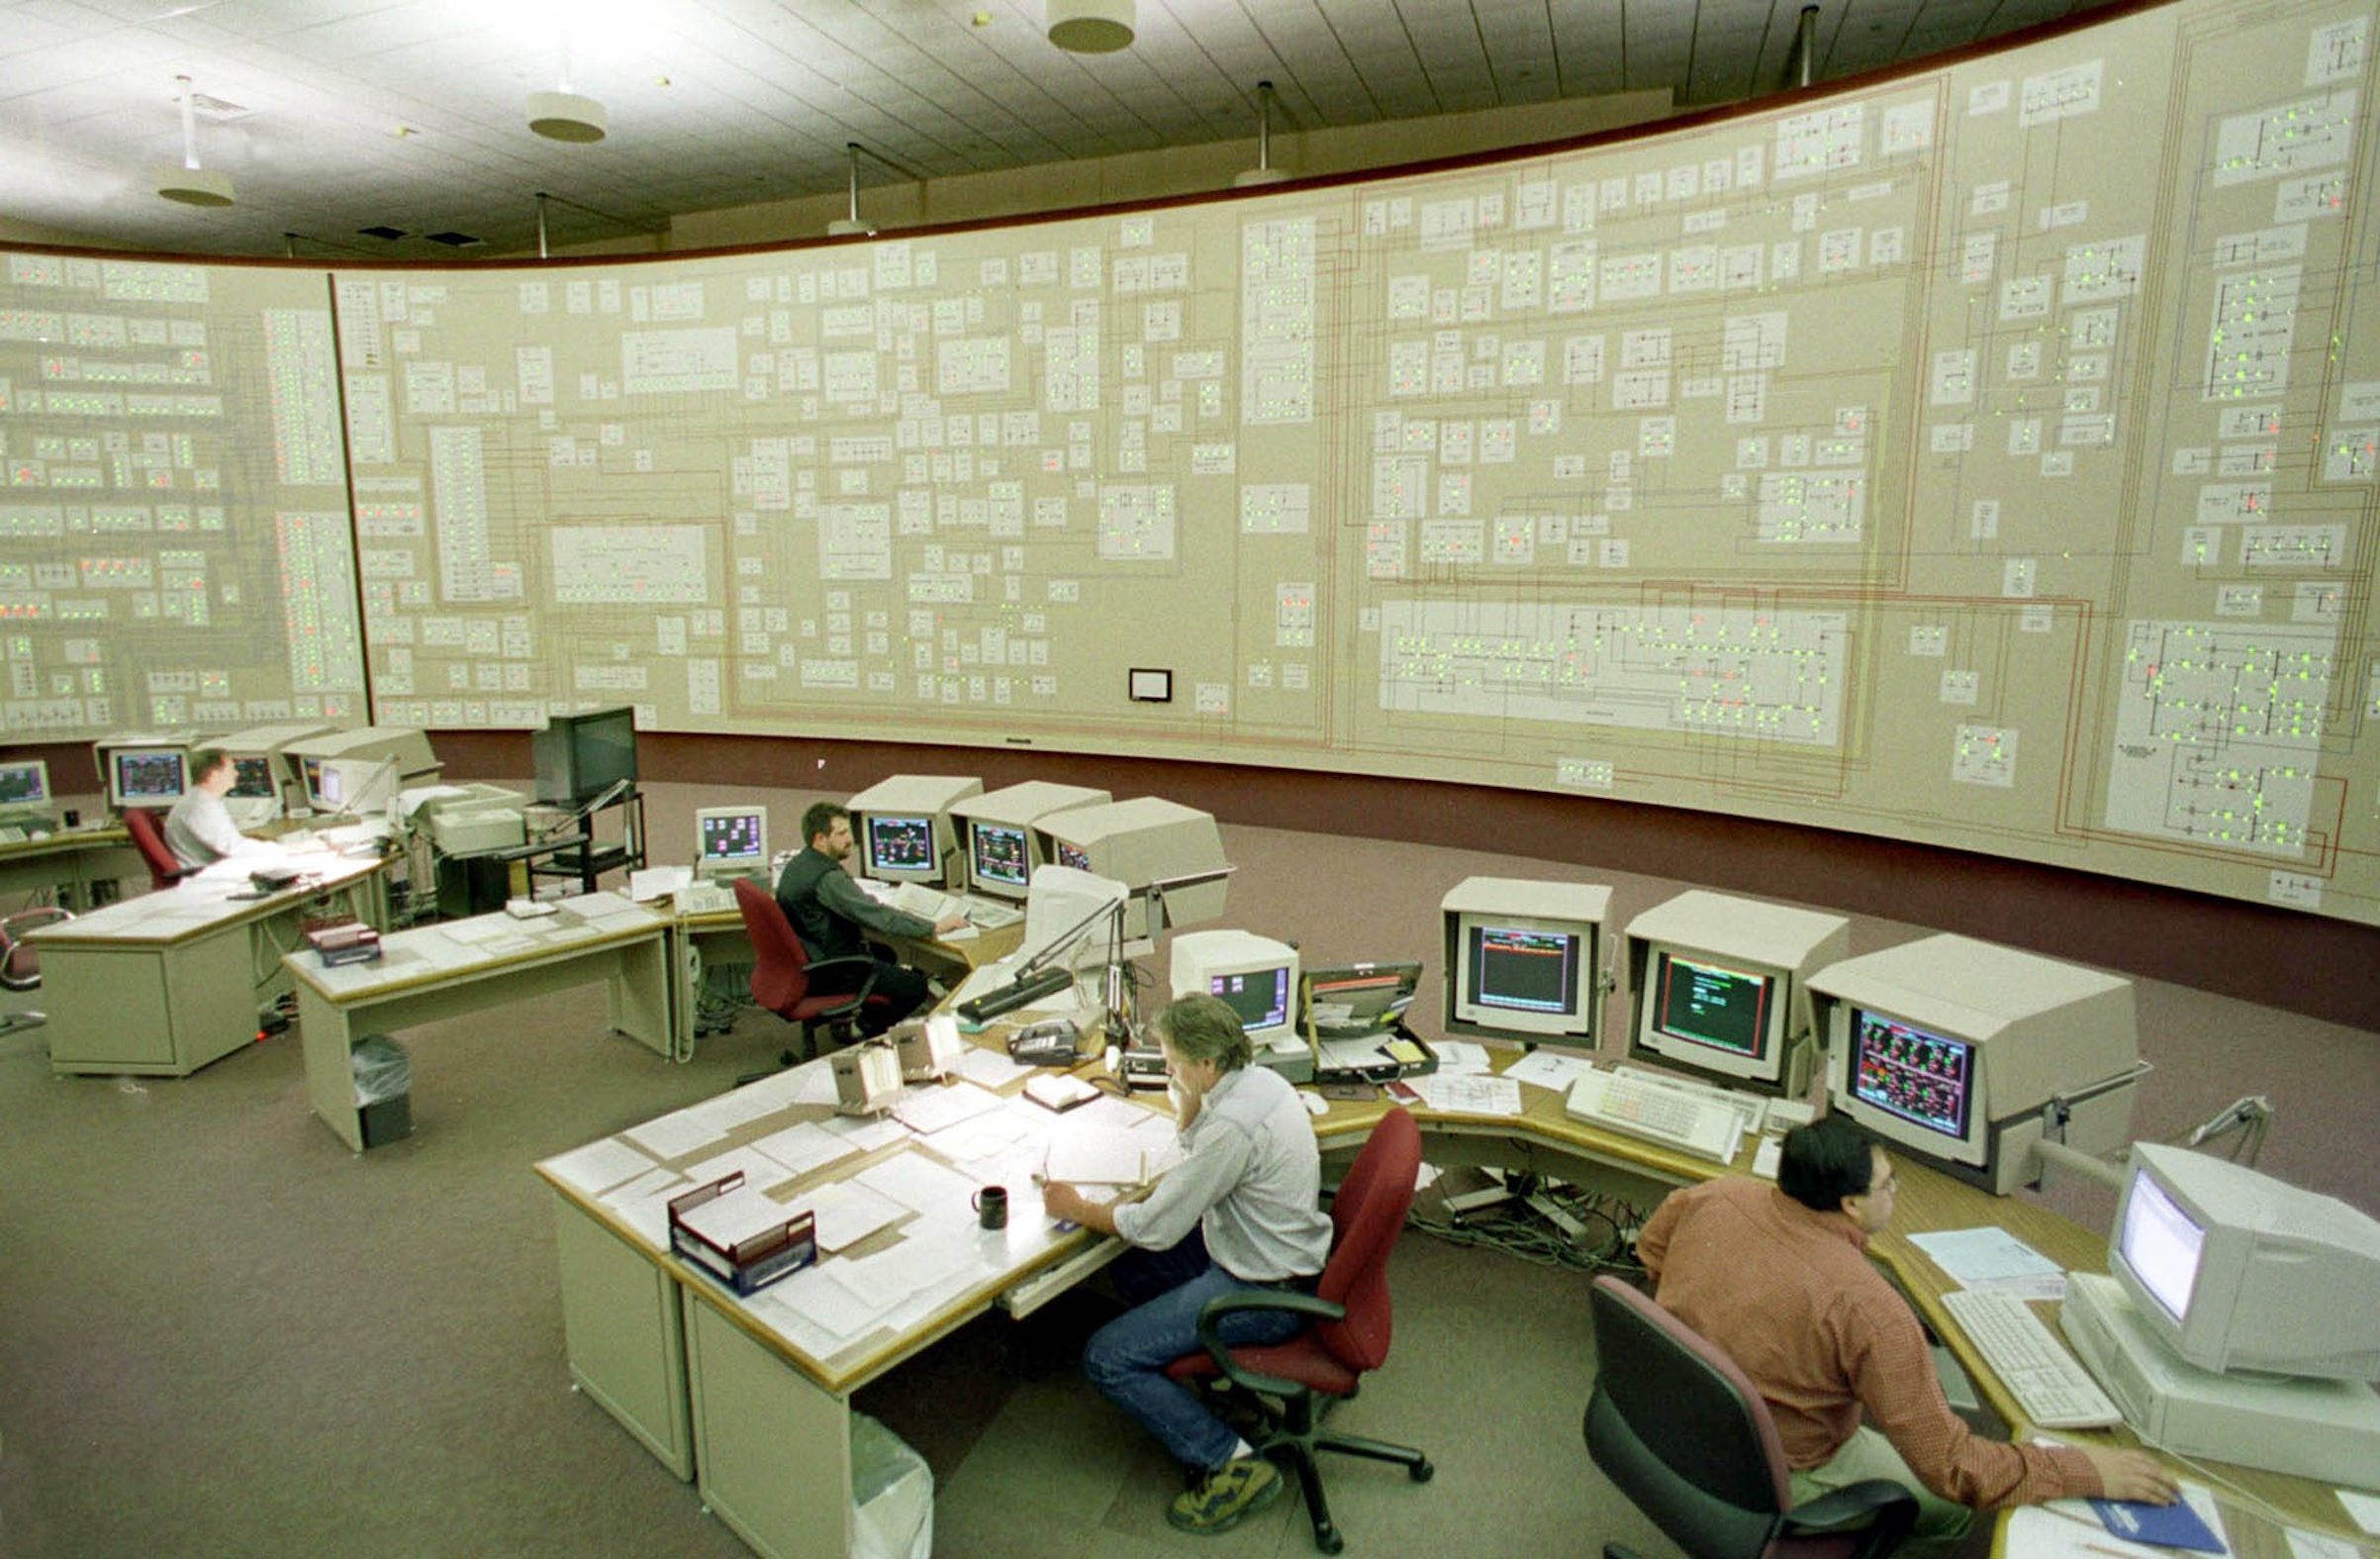 The power grid is lit in the final days of Y2K testing at the Niagara Mohawk Power Company control facility in Buffalo, N.Y., Dec. 28, 1999. The company planned for more than 1000 staff to be on duty system-wide on New Year's Eve to be ready for any problems. (Joe Traver—Liaison Agency/Getty Images)